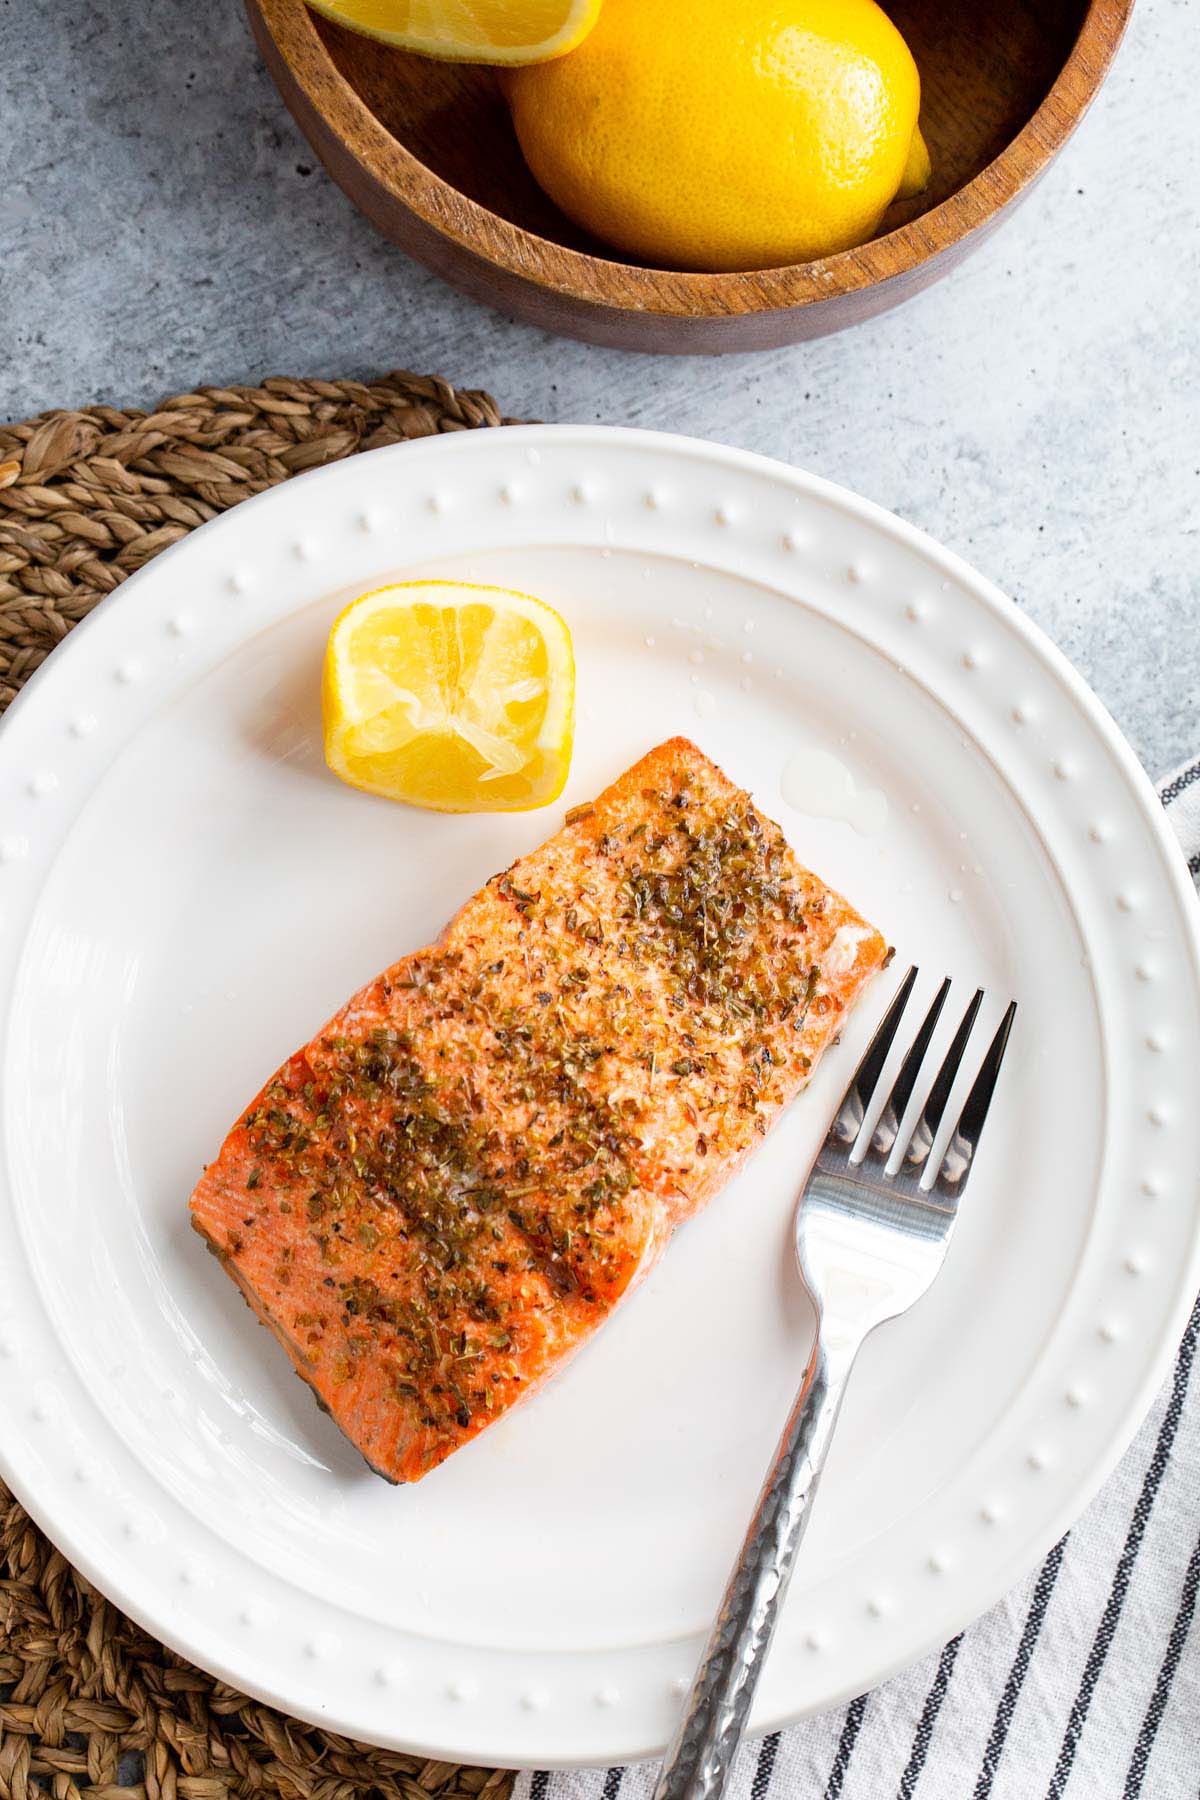 Cooked salmon on a plate with lemon wedge.